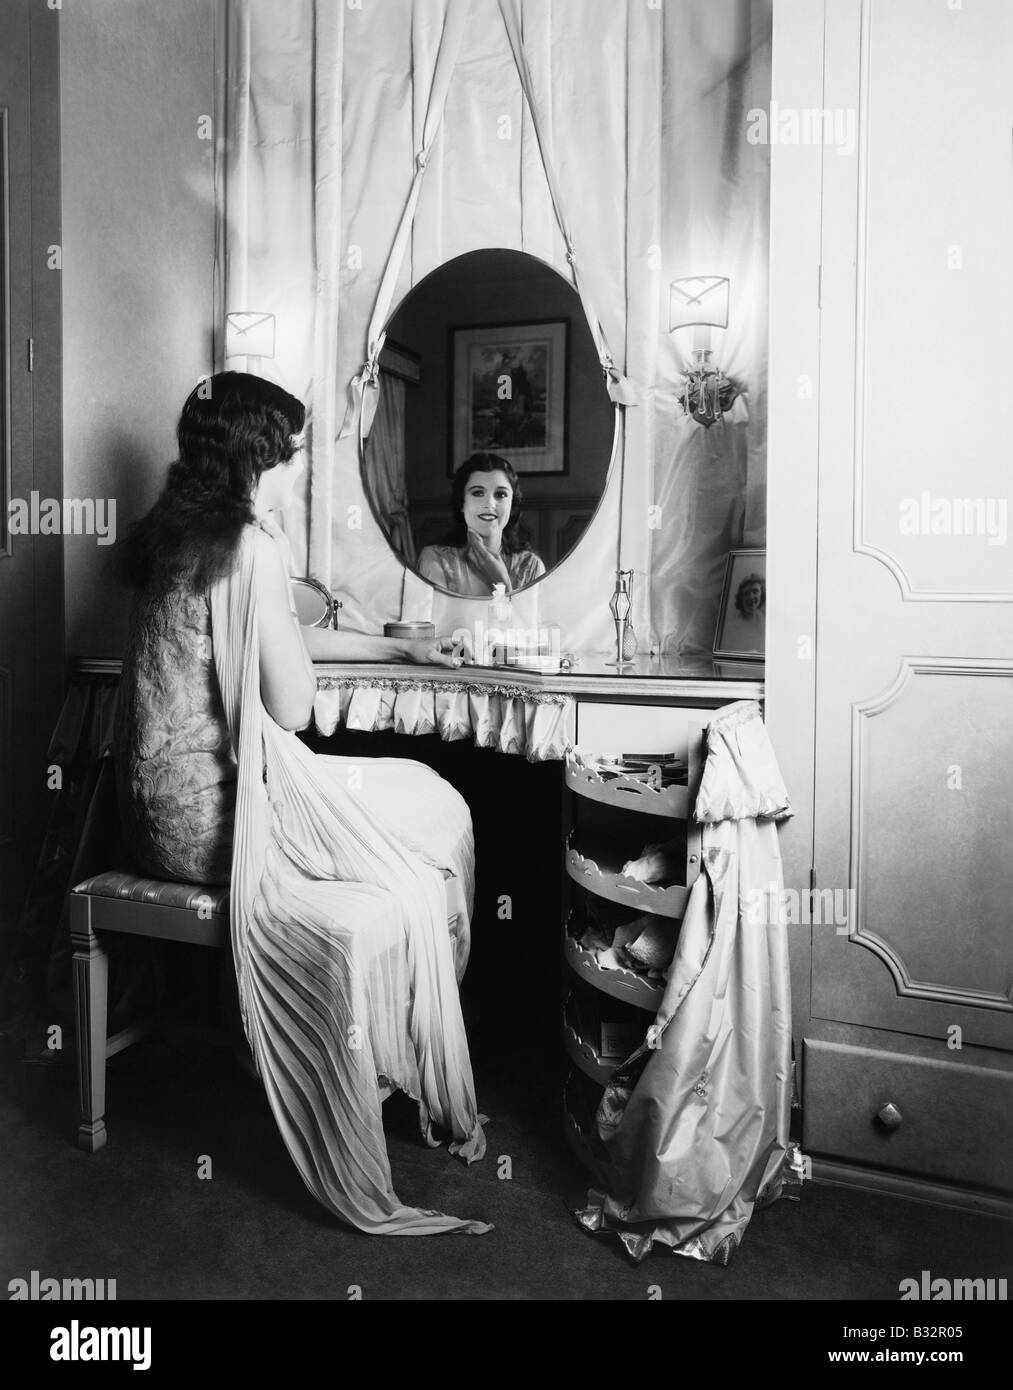 Dressing table mirror Black and White Stock Photos & Images - Alamy